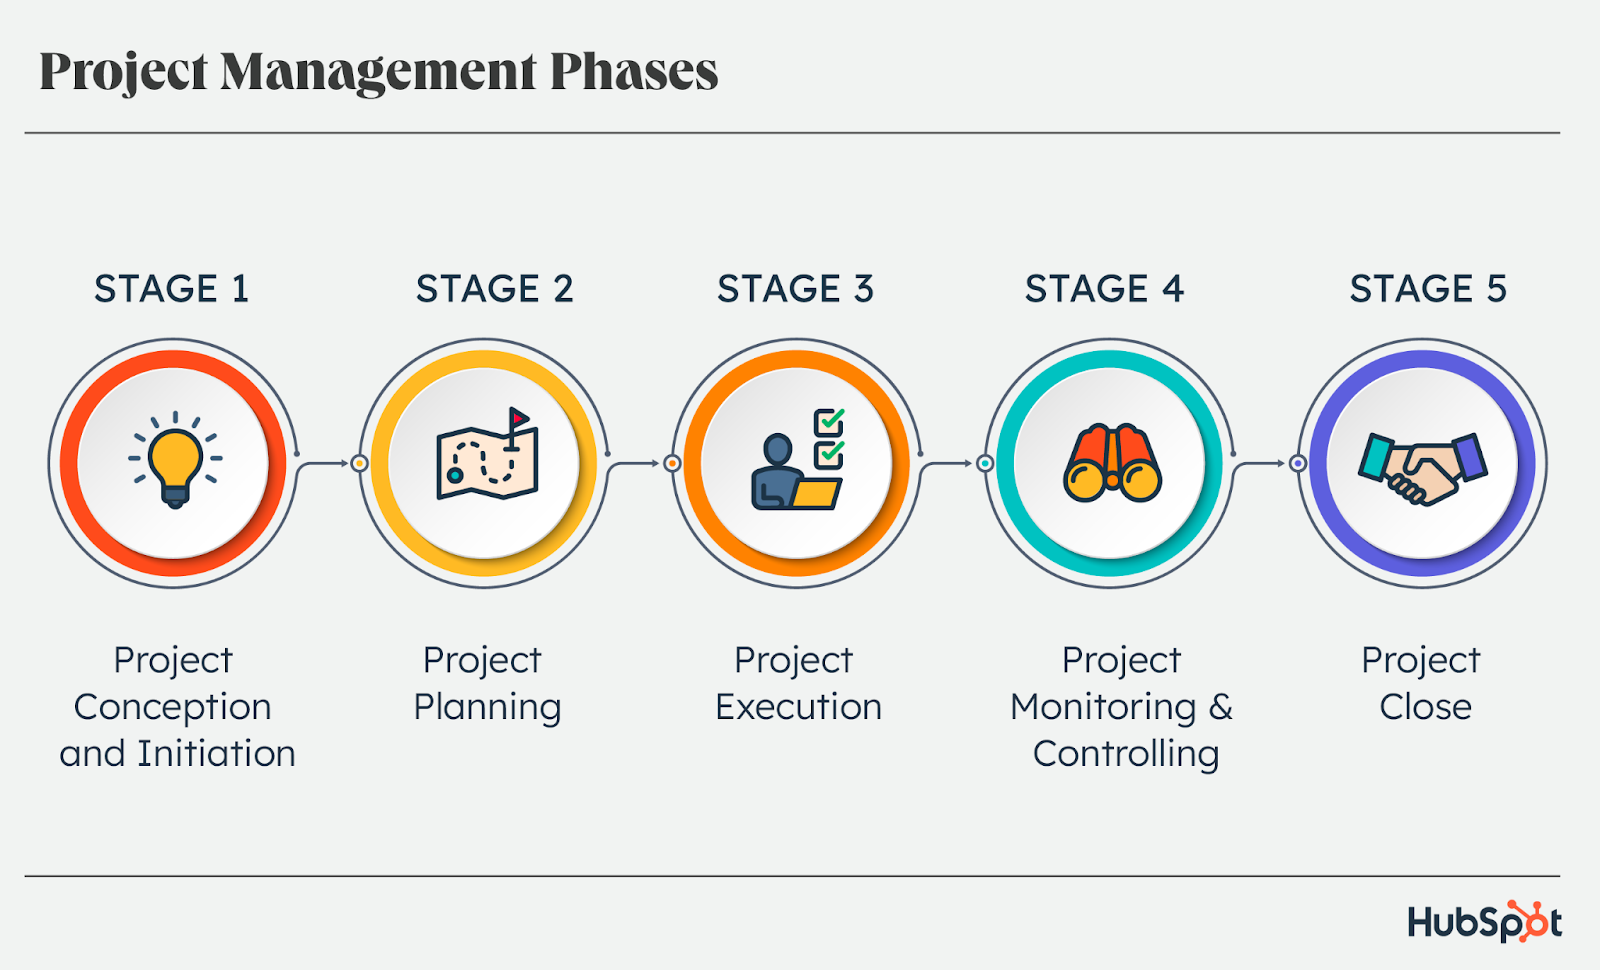 How Does Project Management Software Improve the Project Lifecycle?